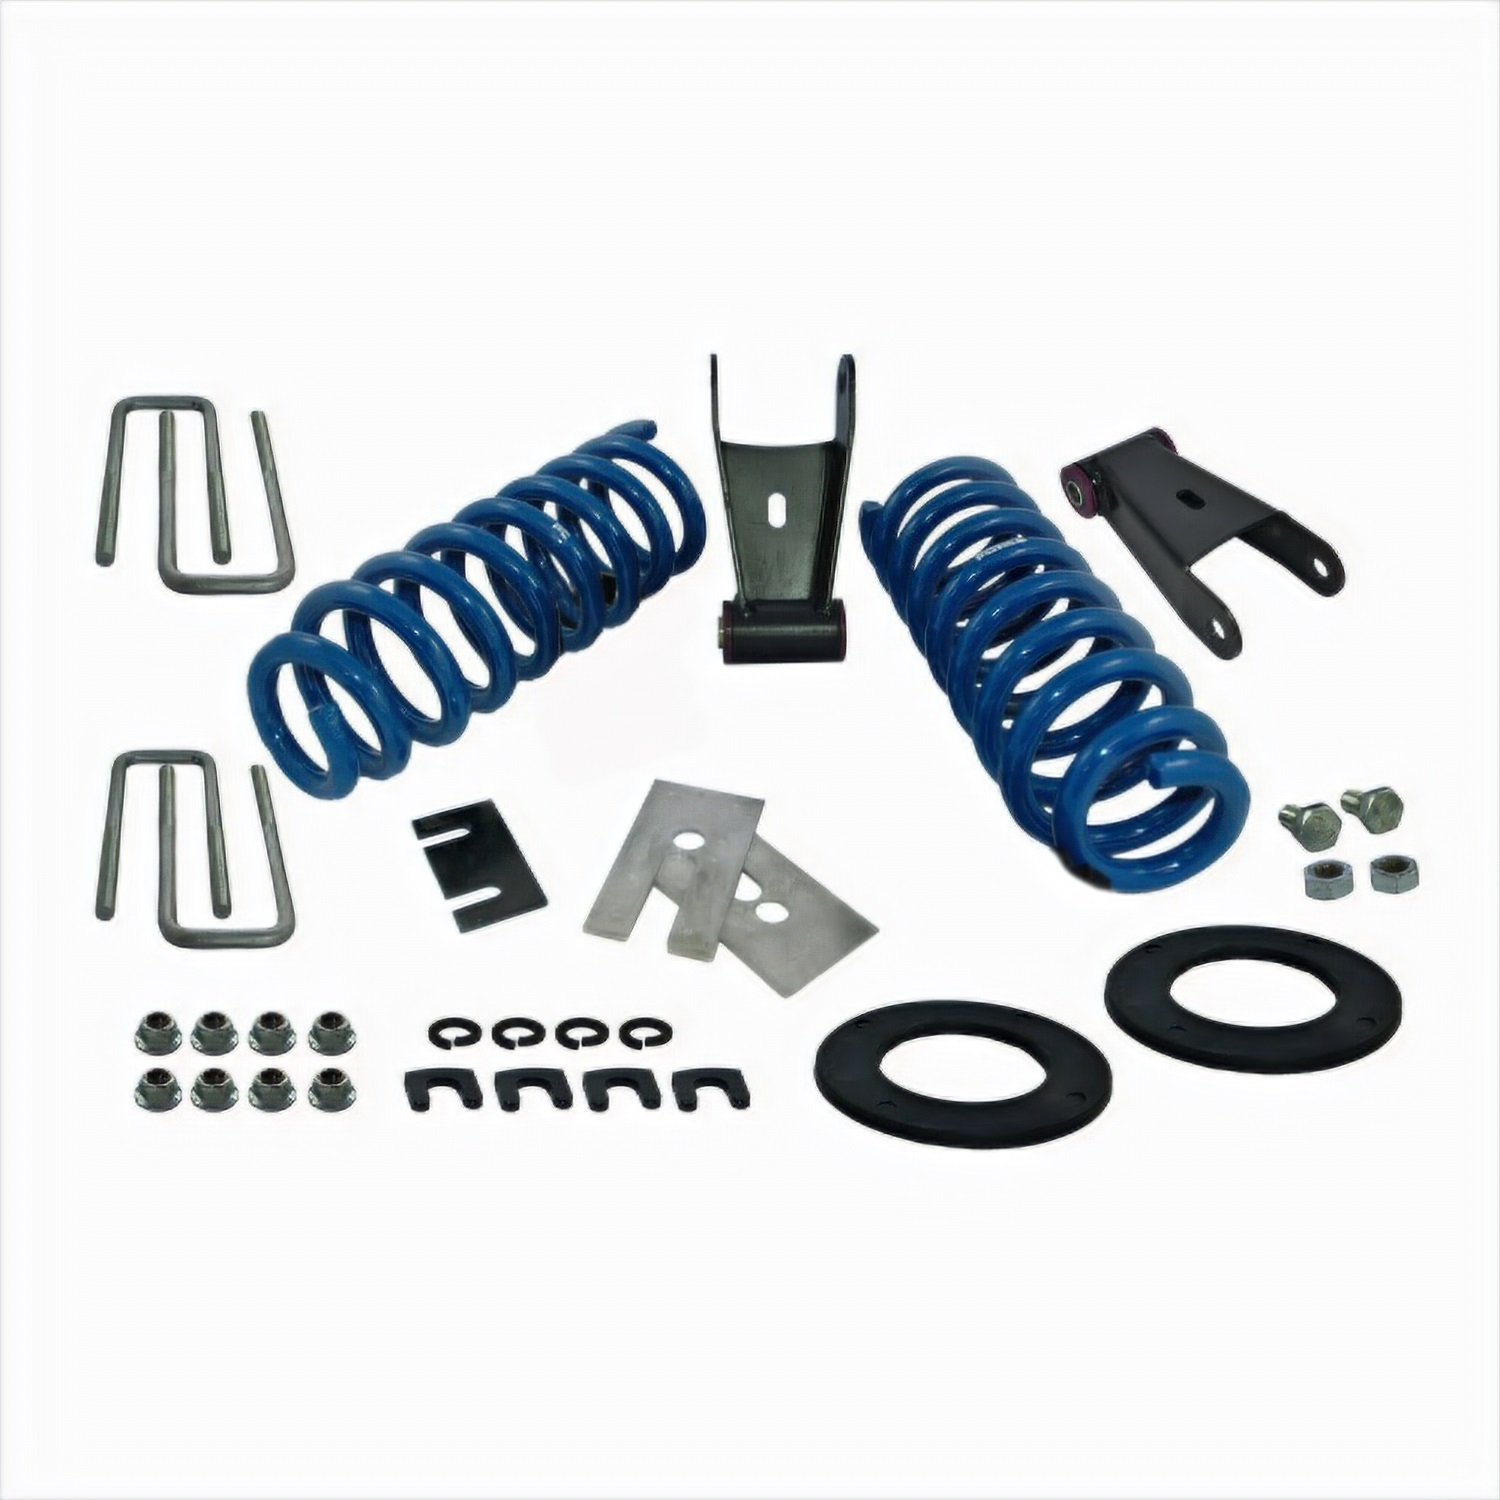 FORD RACING M-3000-H4 Lowering Kit Fits 15-17 F-150